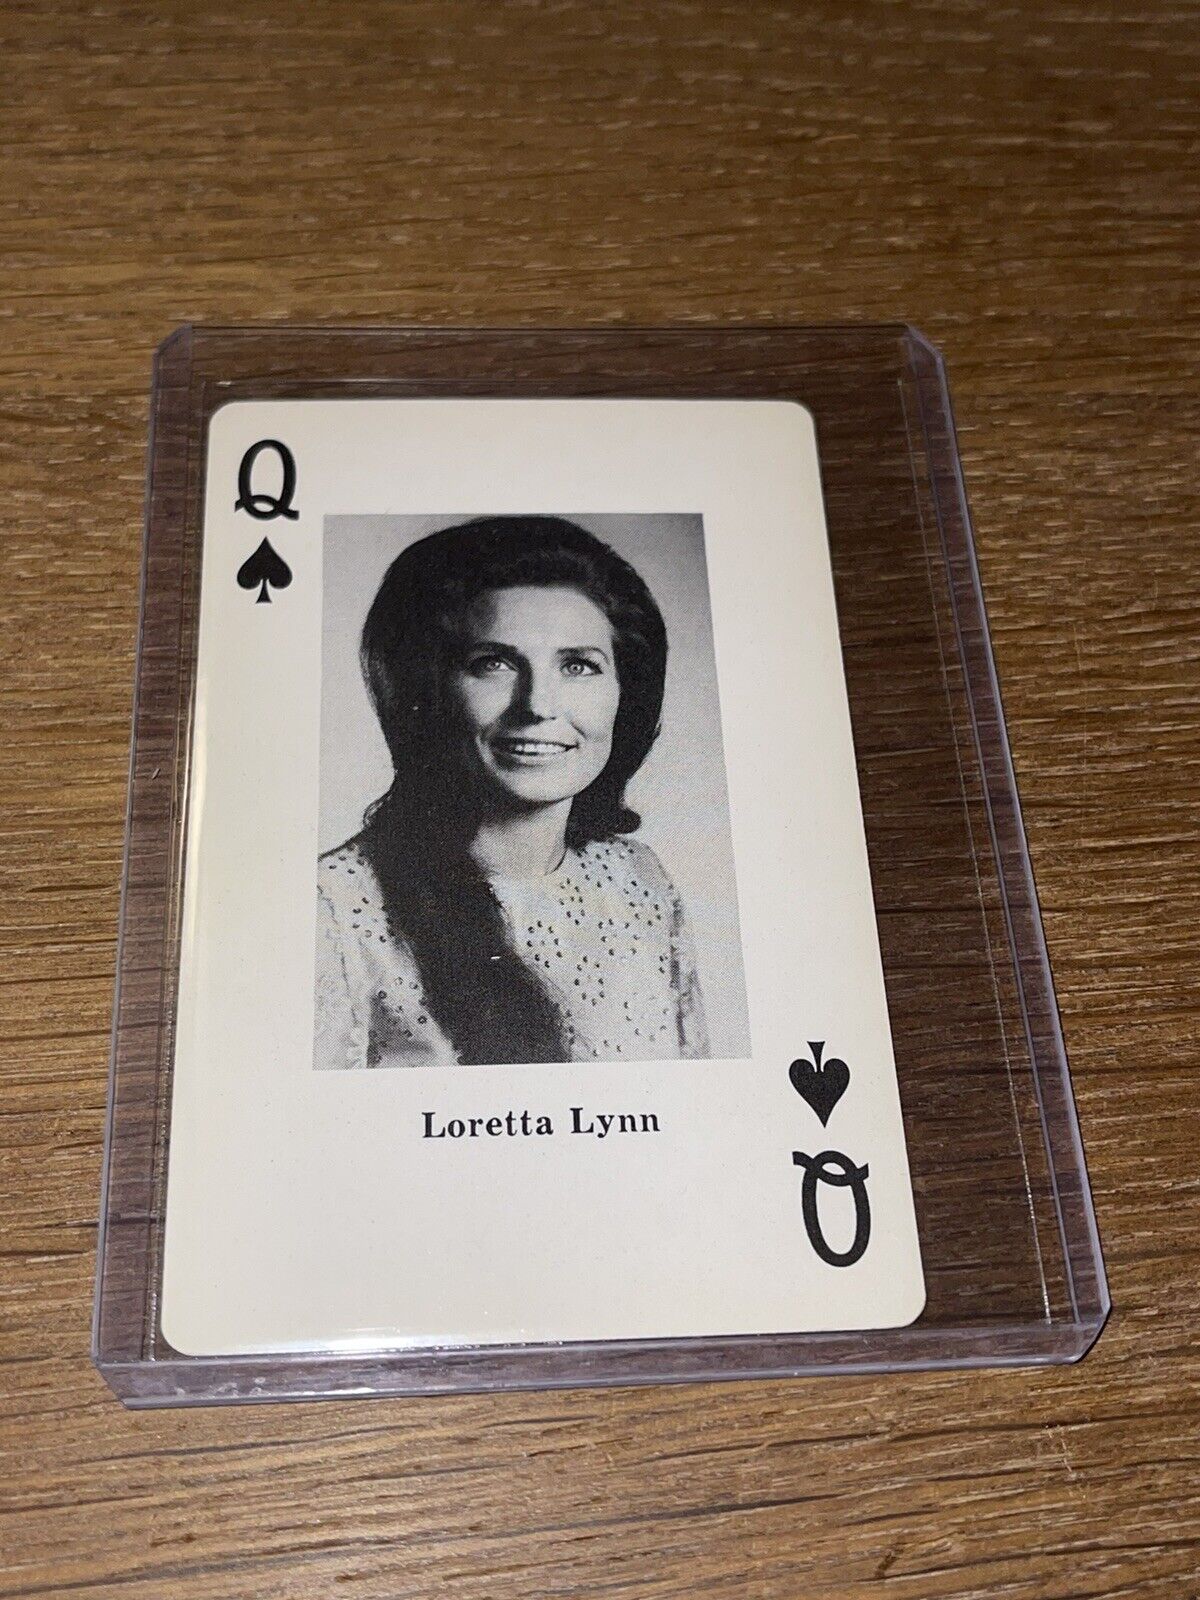 EXTREMELY RARE 1970 HEATHER COUNTRY MUSIC LORETTA LYNN MUSIC CARD